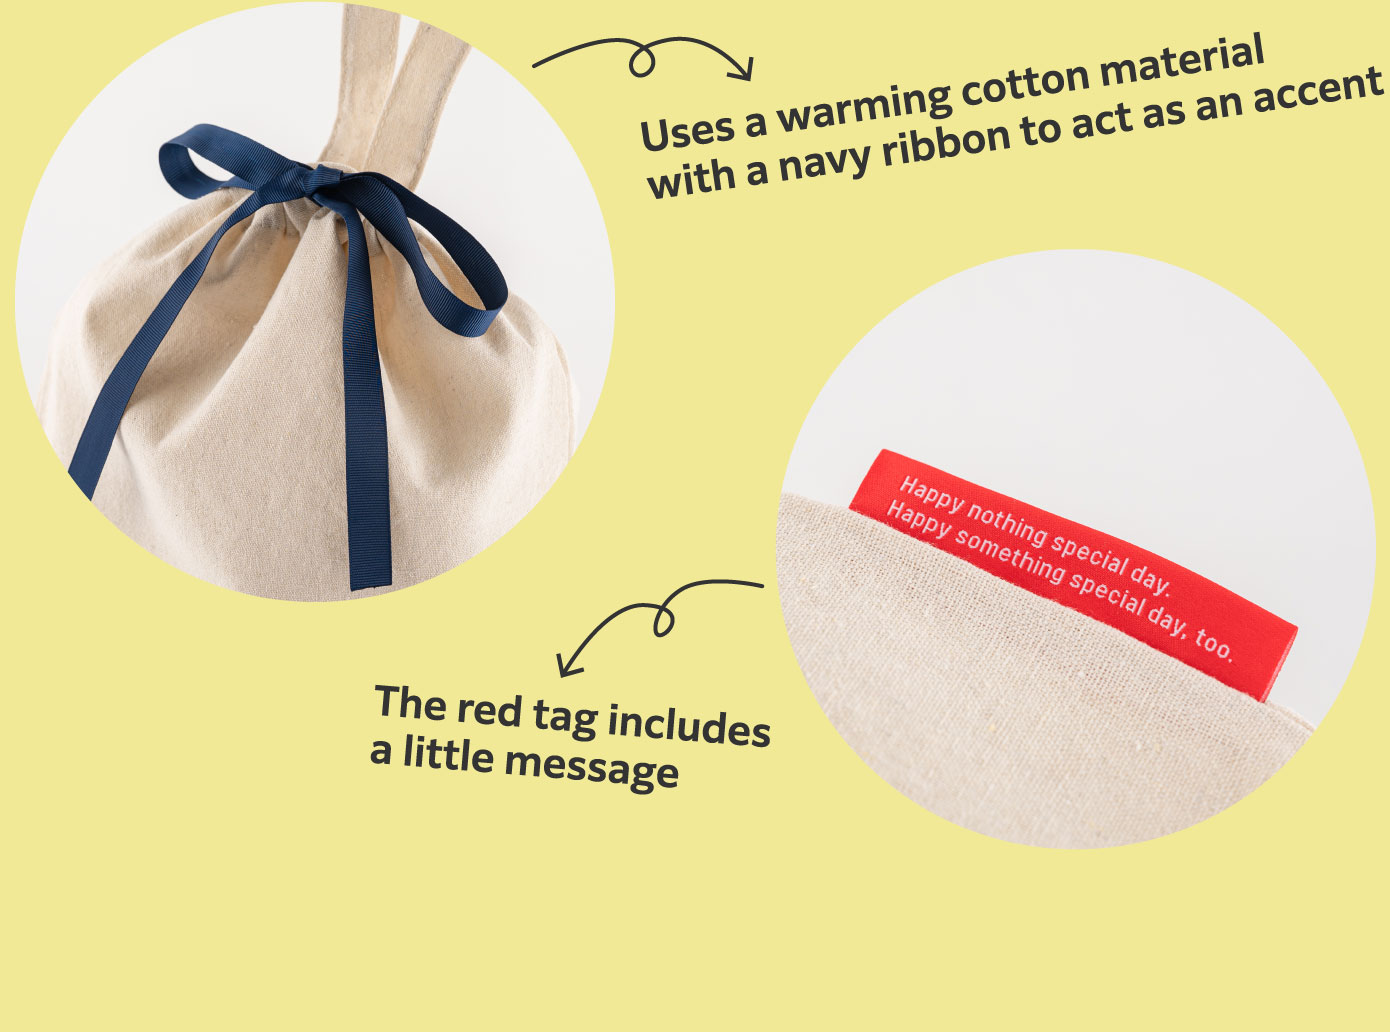 Uses a warming cotton material with a navy ribbon to act as an accent
                  The red tag includes a little message